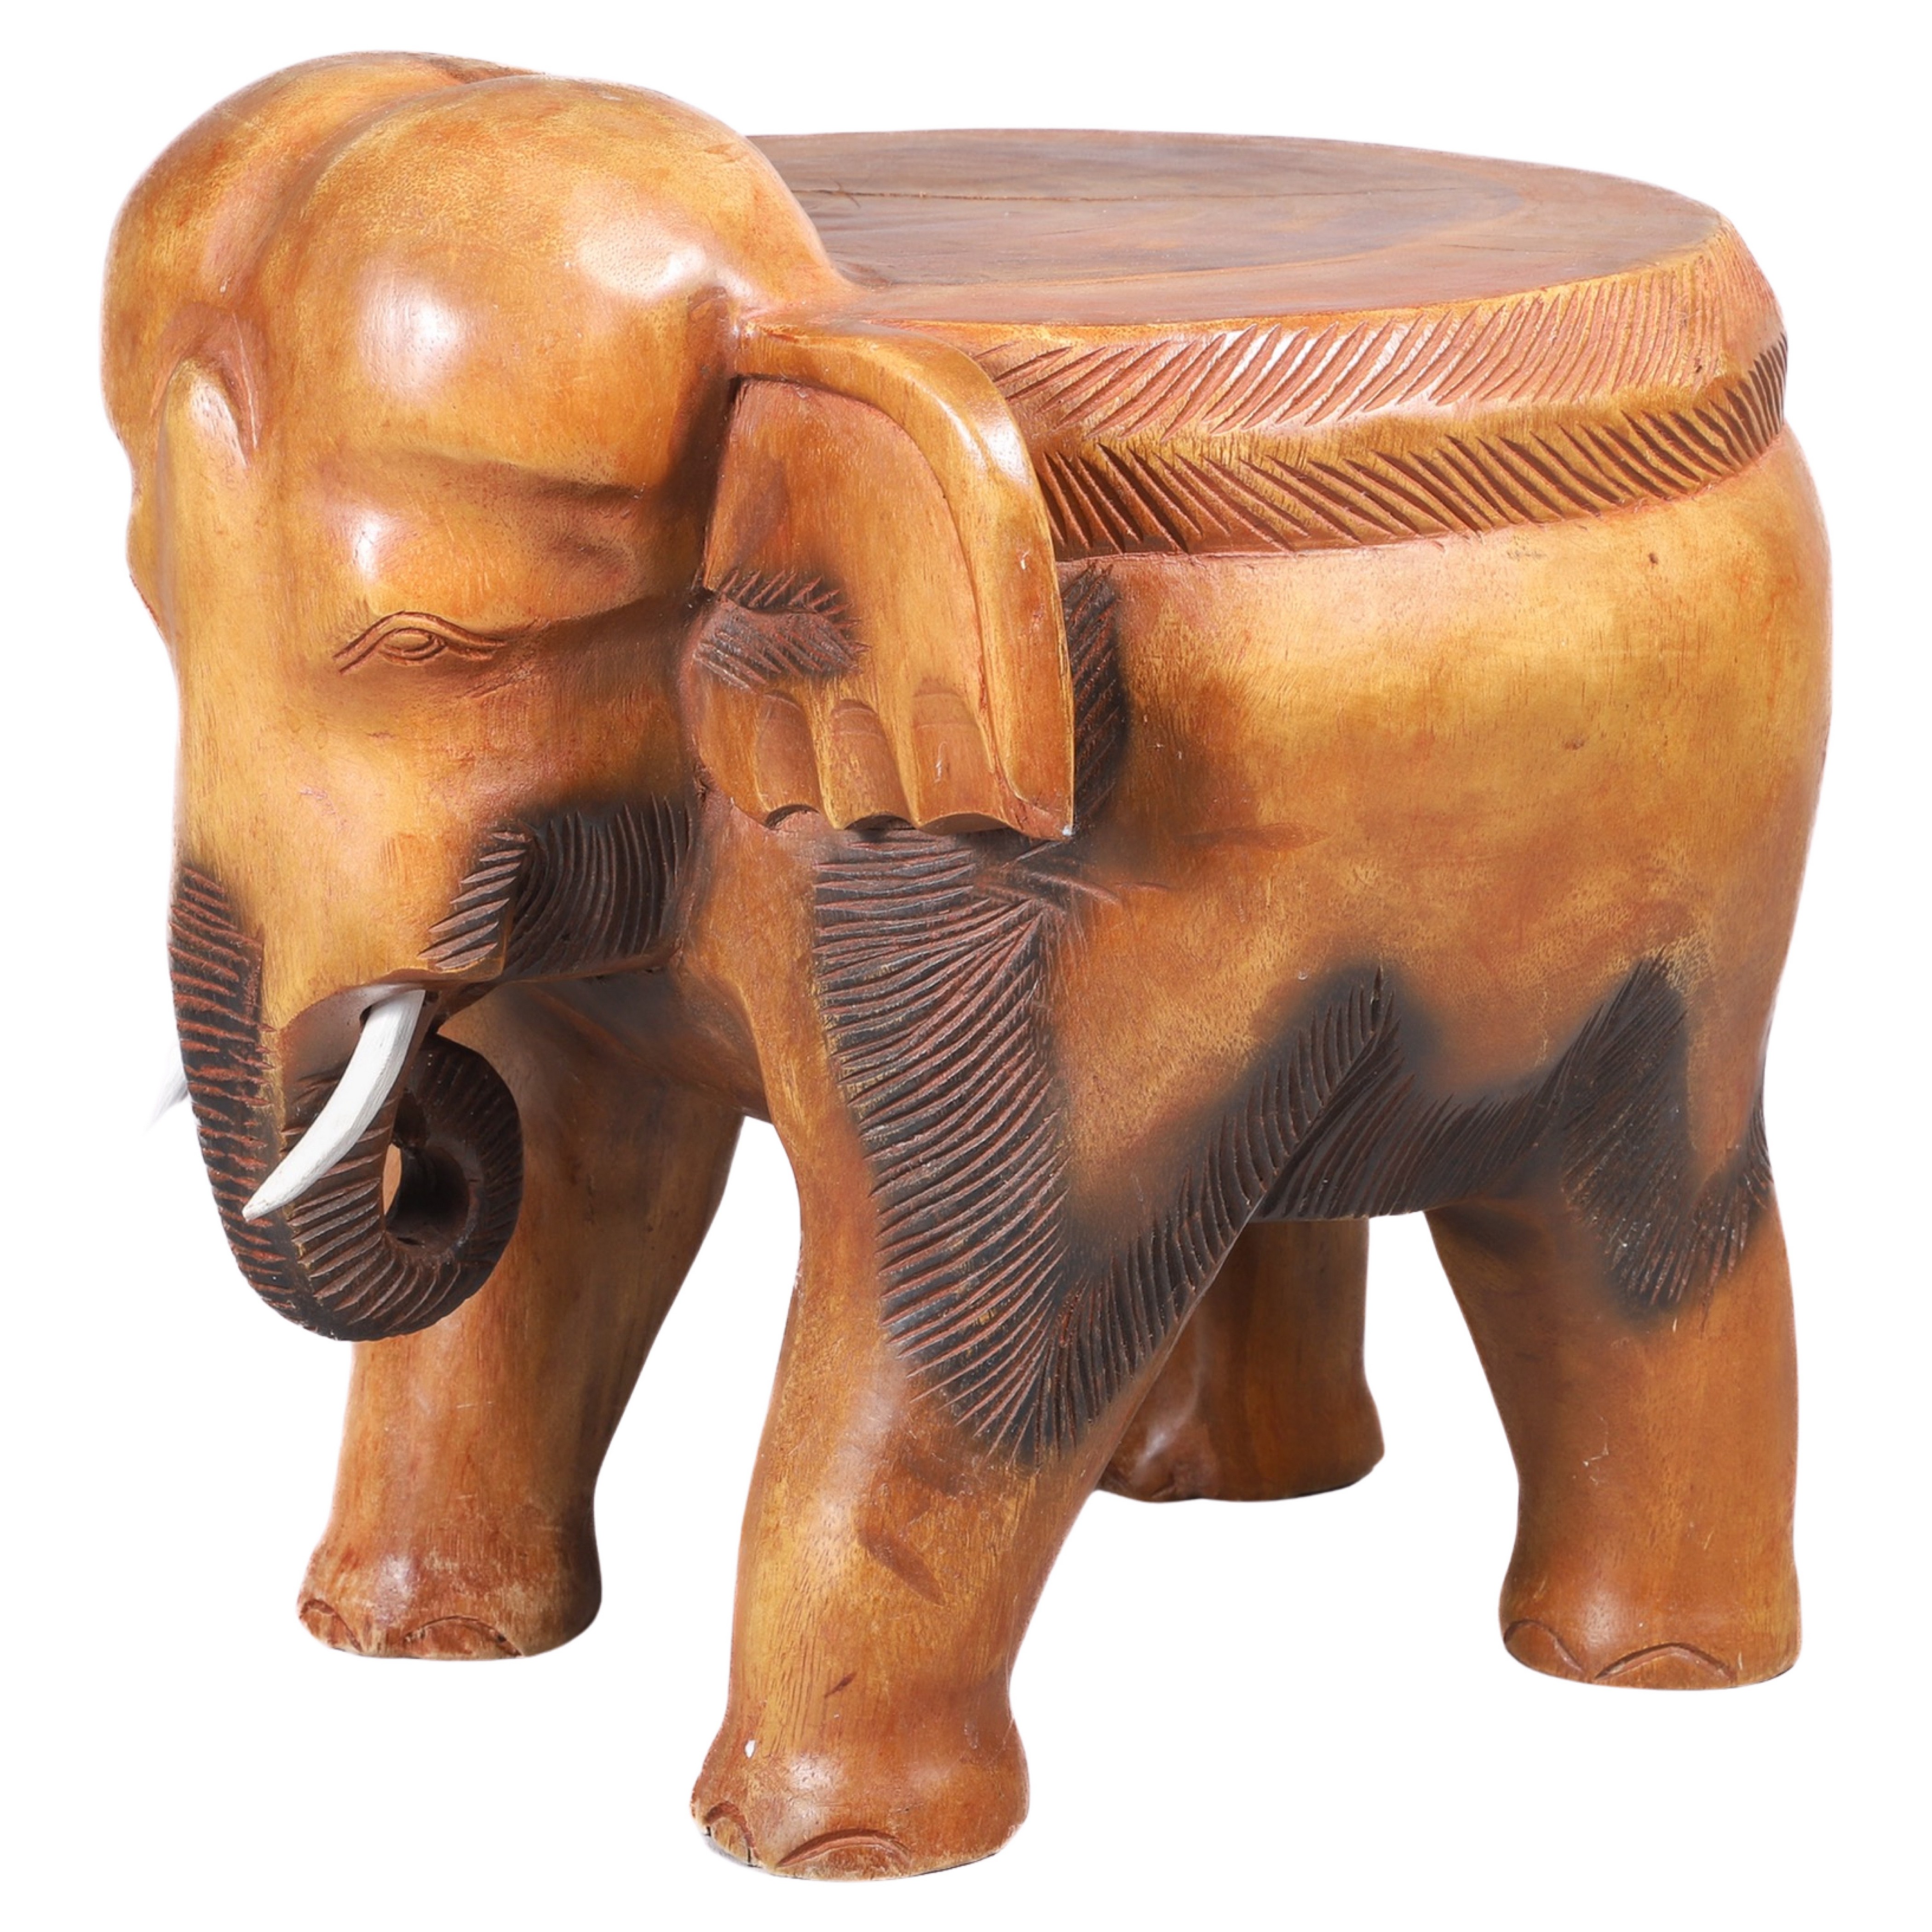 Carved wood elephant stool with painted